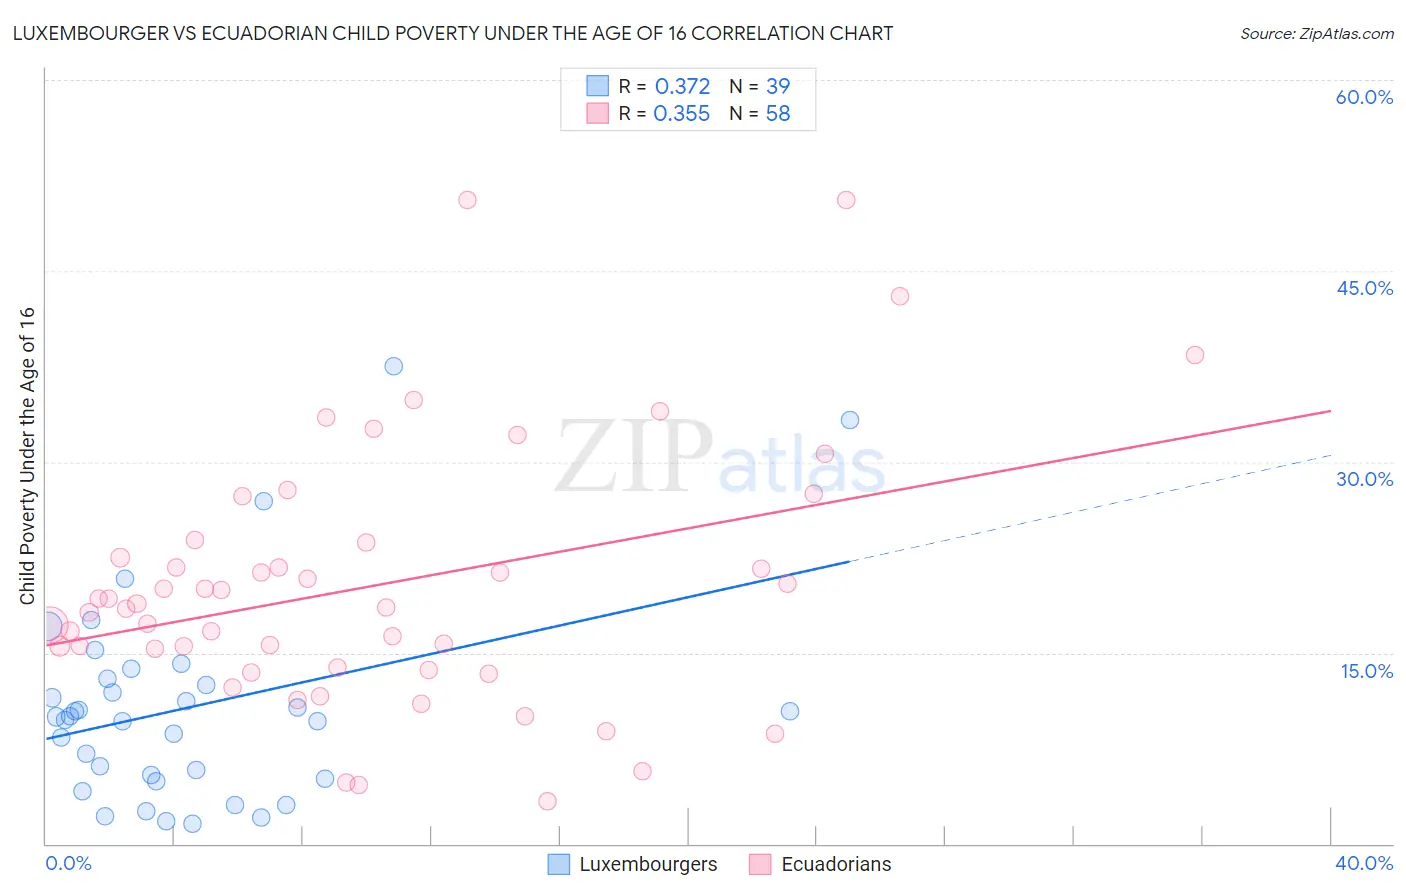 Luxembourger vs Ecuadorian Child Poverty Under the Age of 16